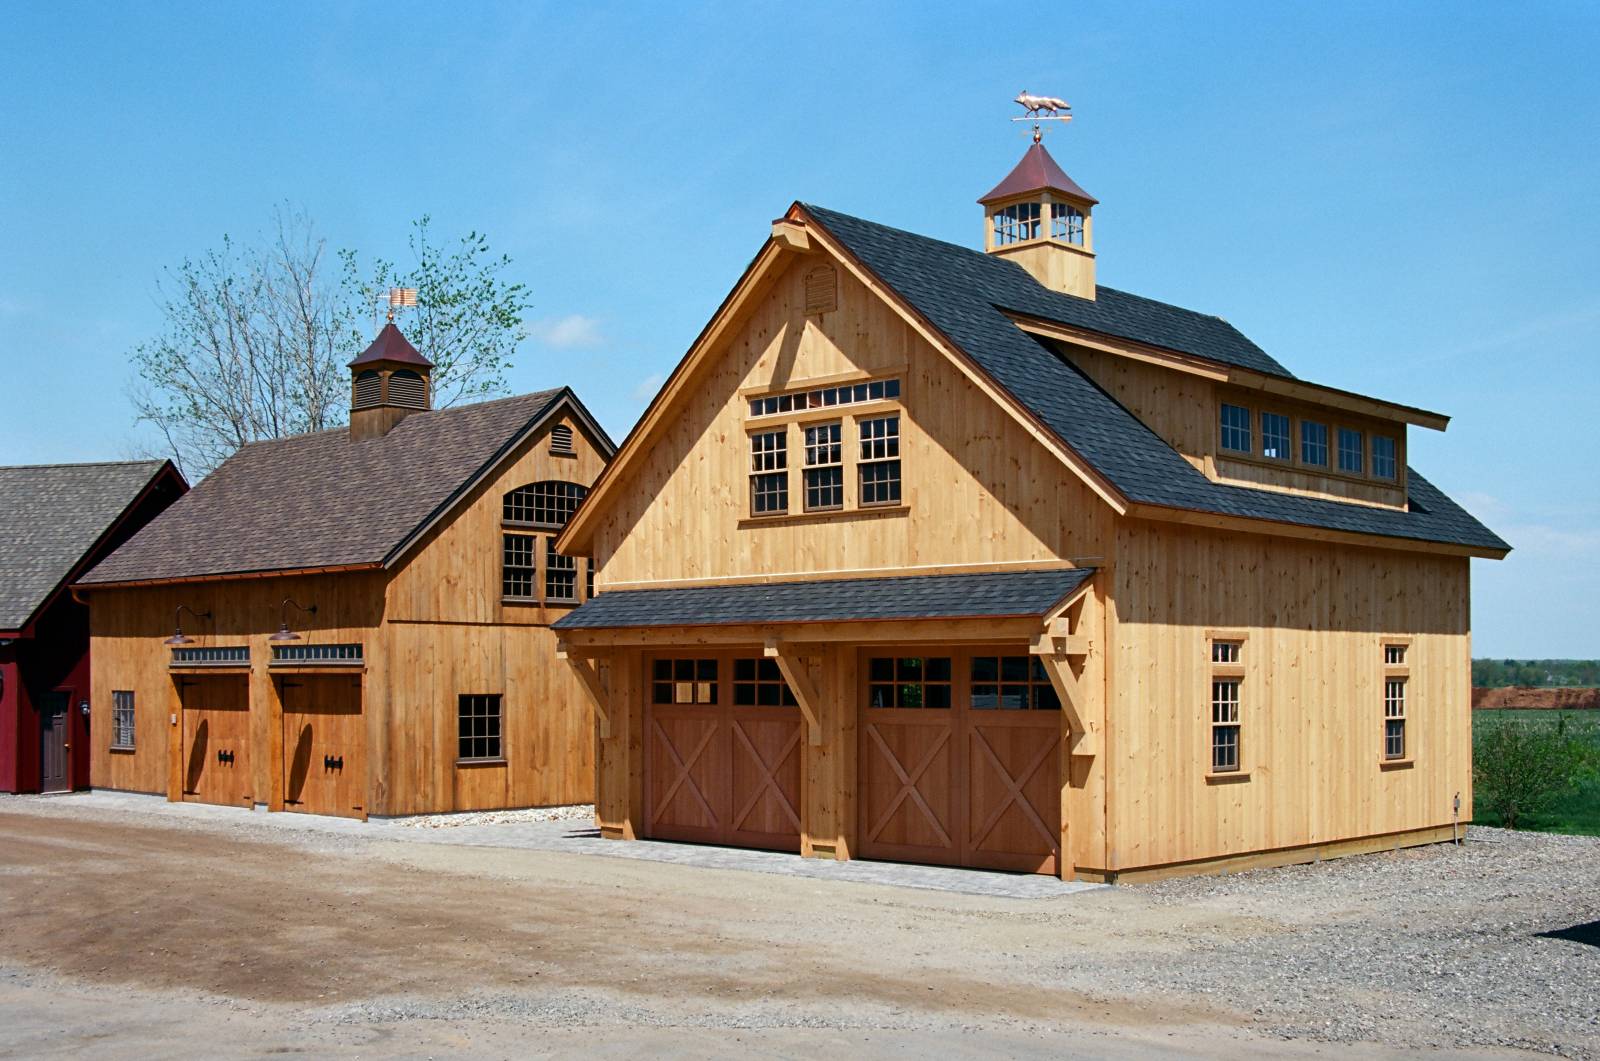 Carriage Barn brothers. Two Carriage Barns on display with different configurations & options.